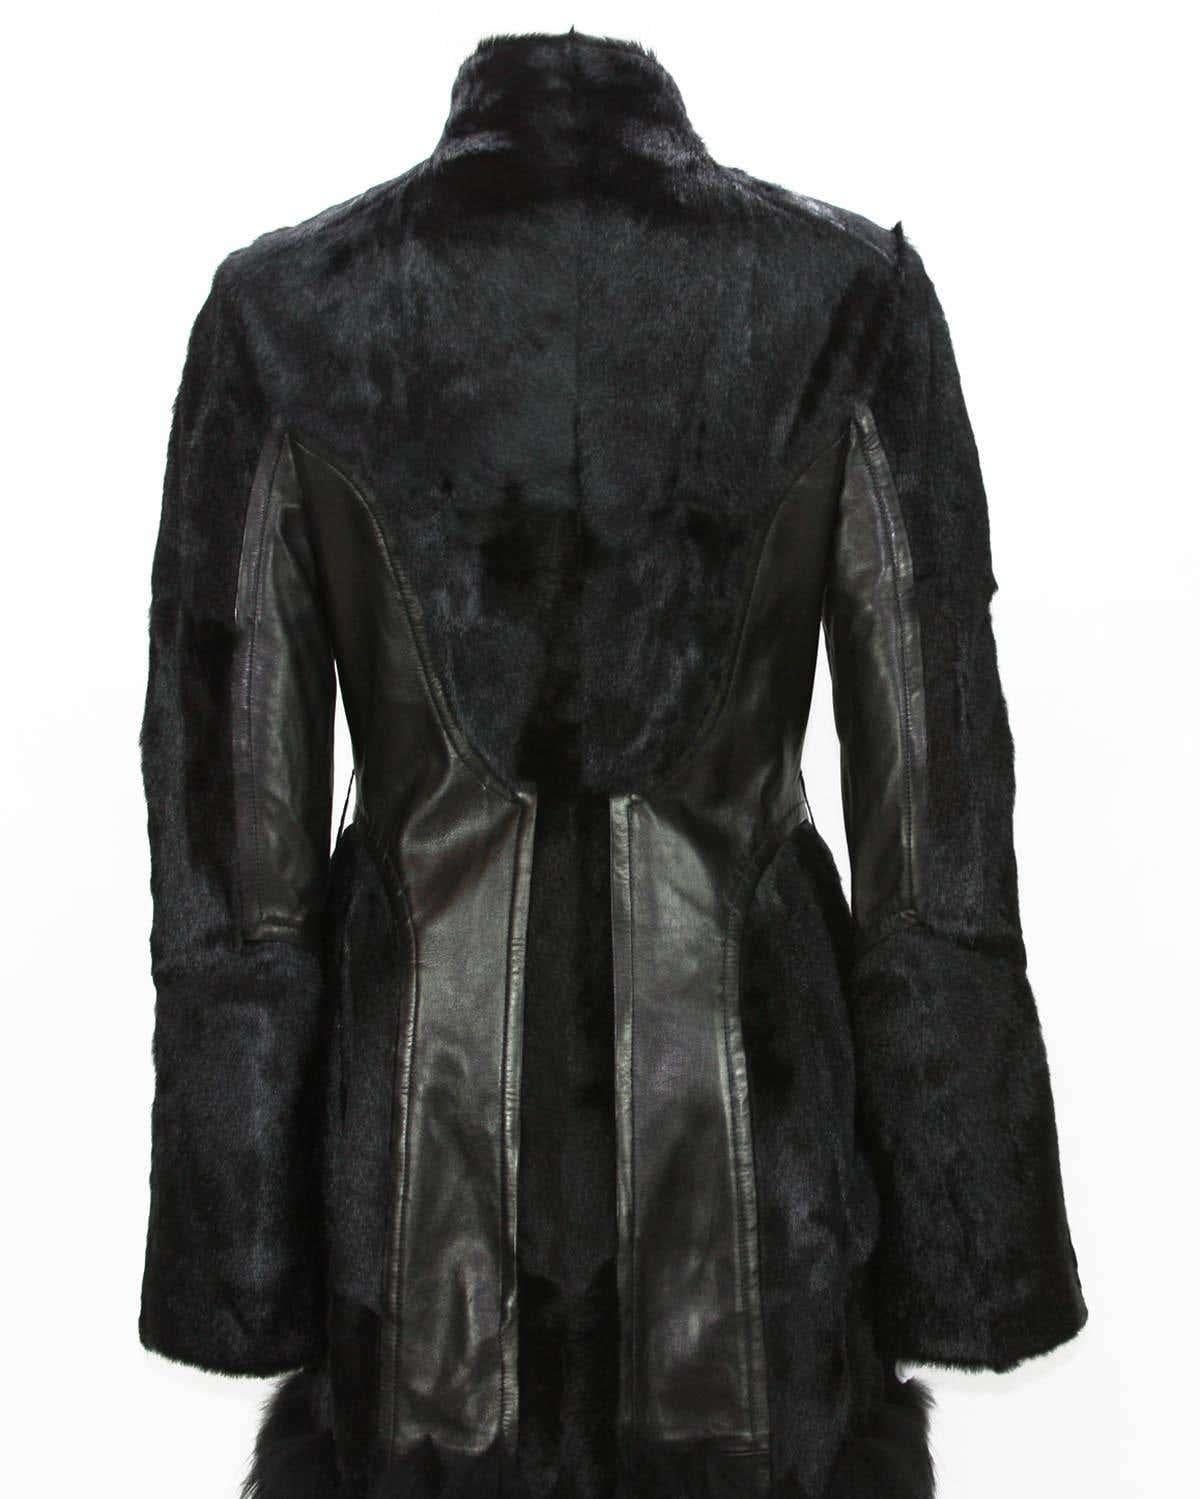 Women's 2004 Tom Ford for Gucci fur trimmed black leather coat